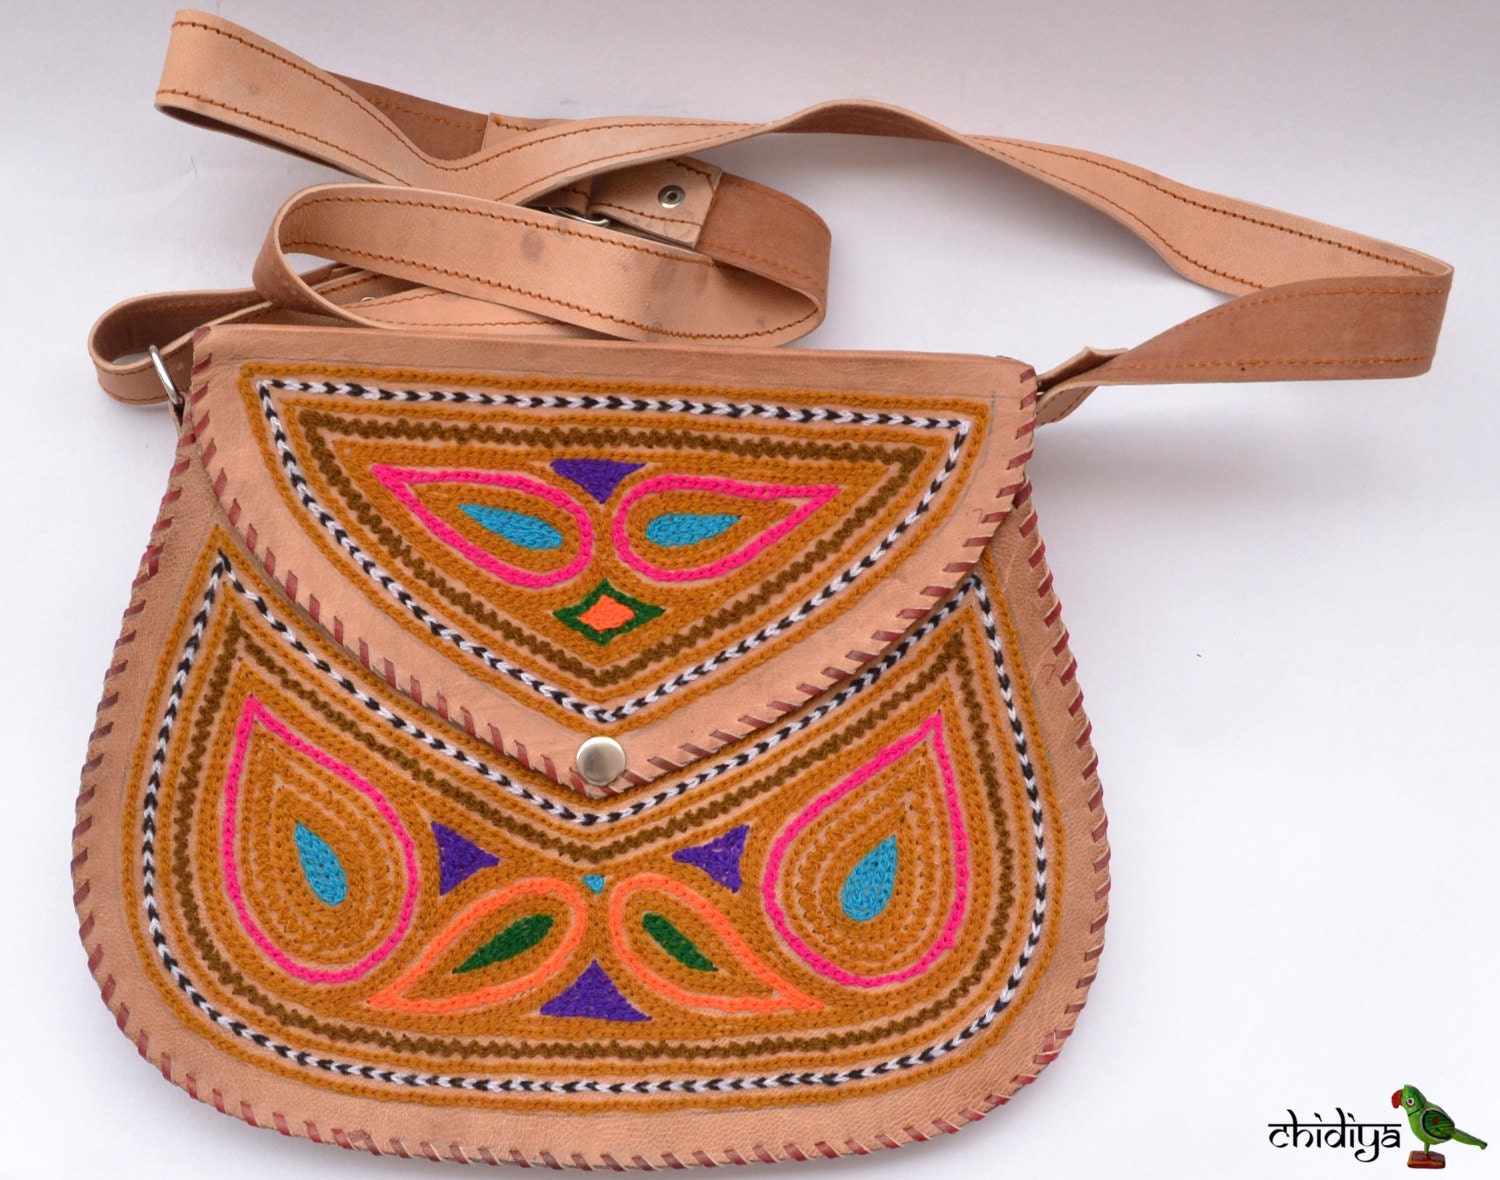 Embroidered handmade Indian leather bag vintage looking